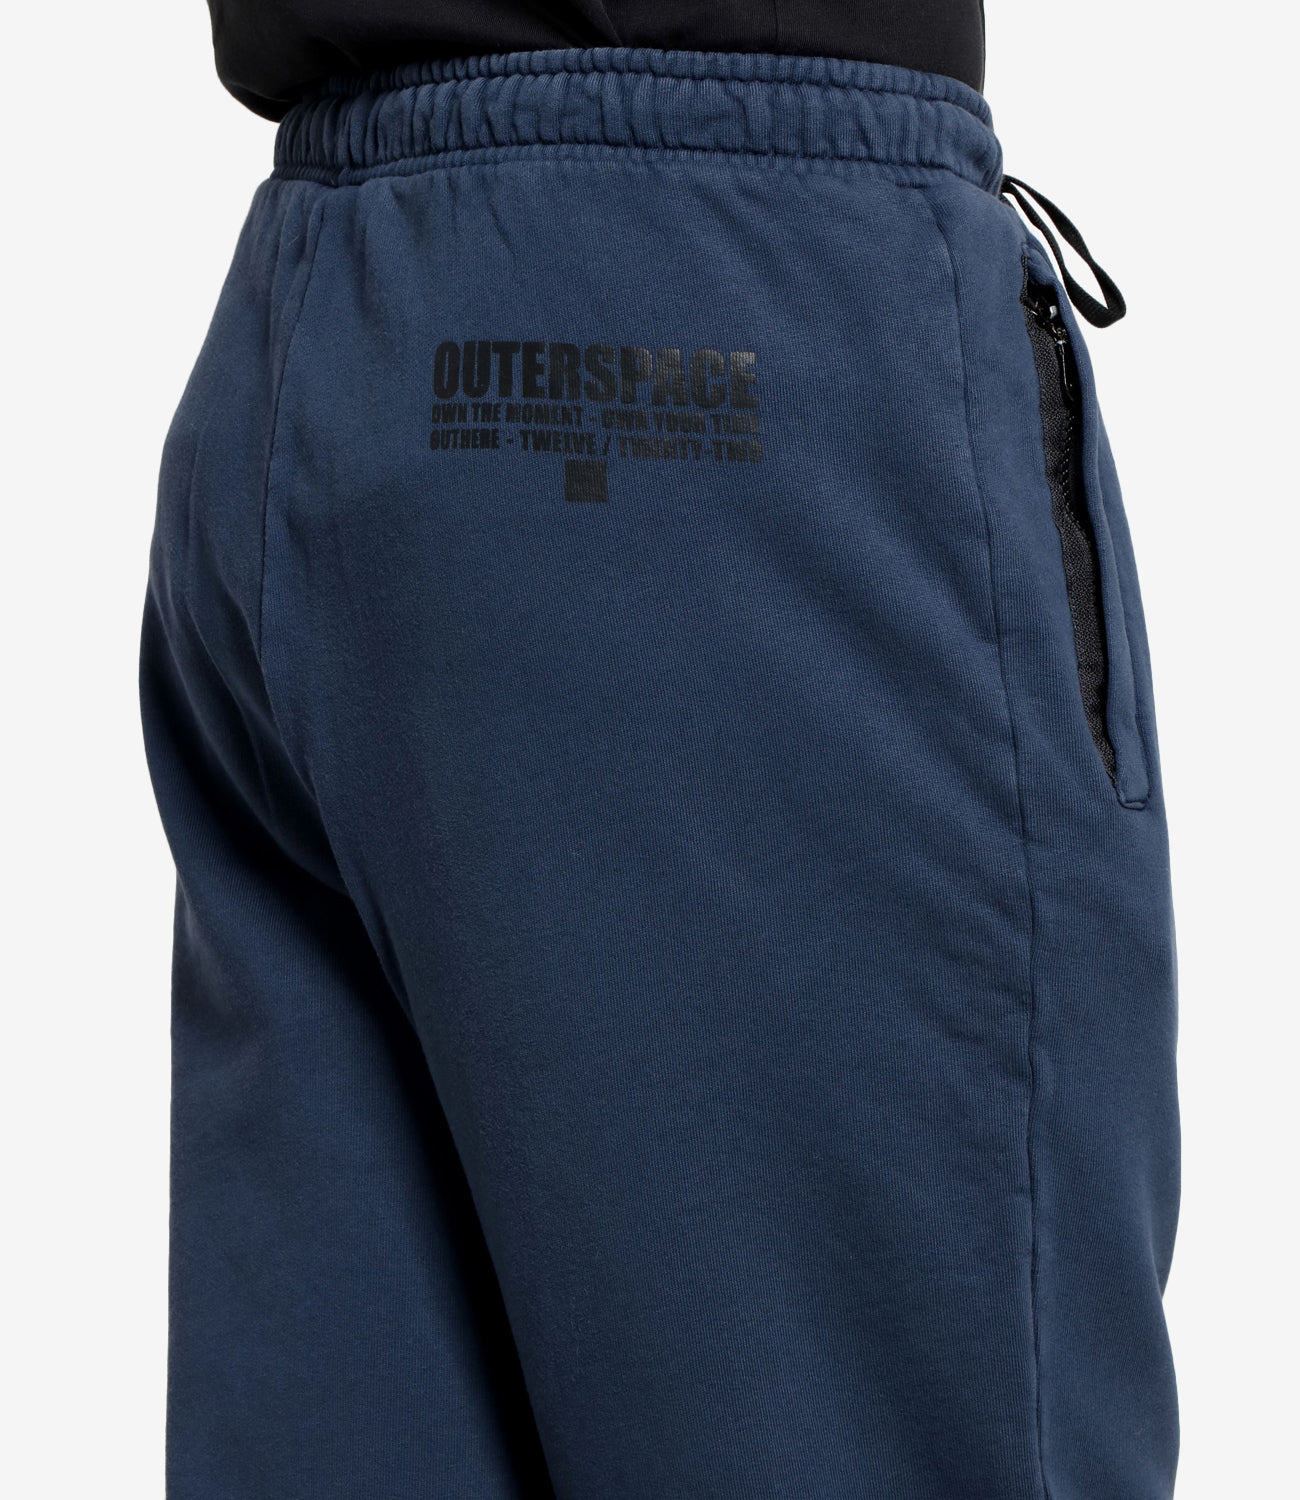 Outhere | Navy Blue Sports Pants